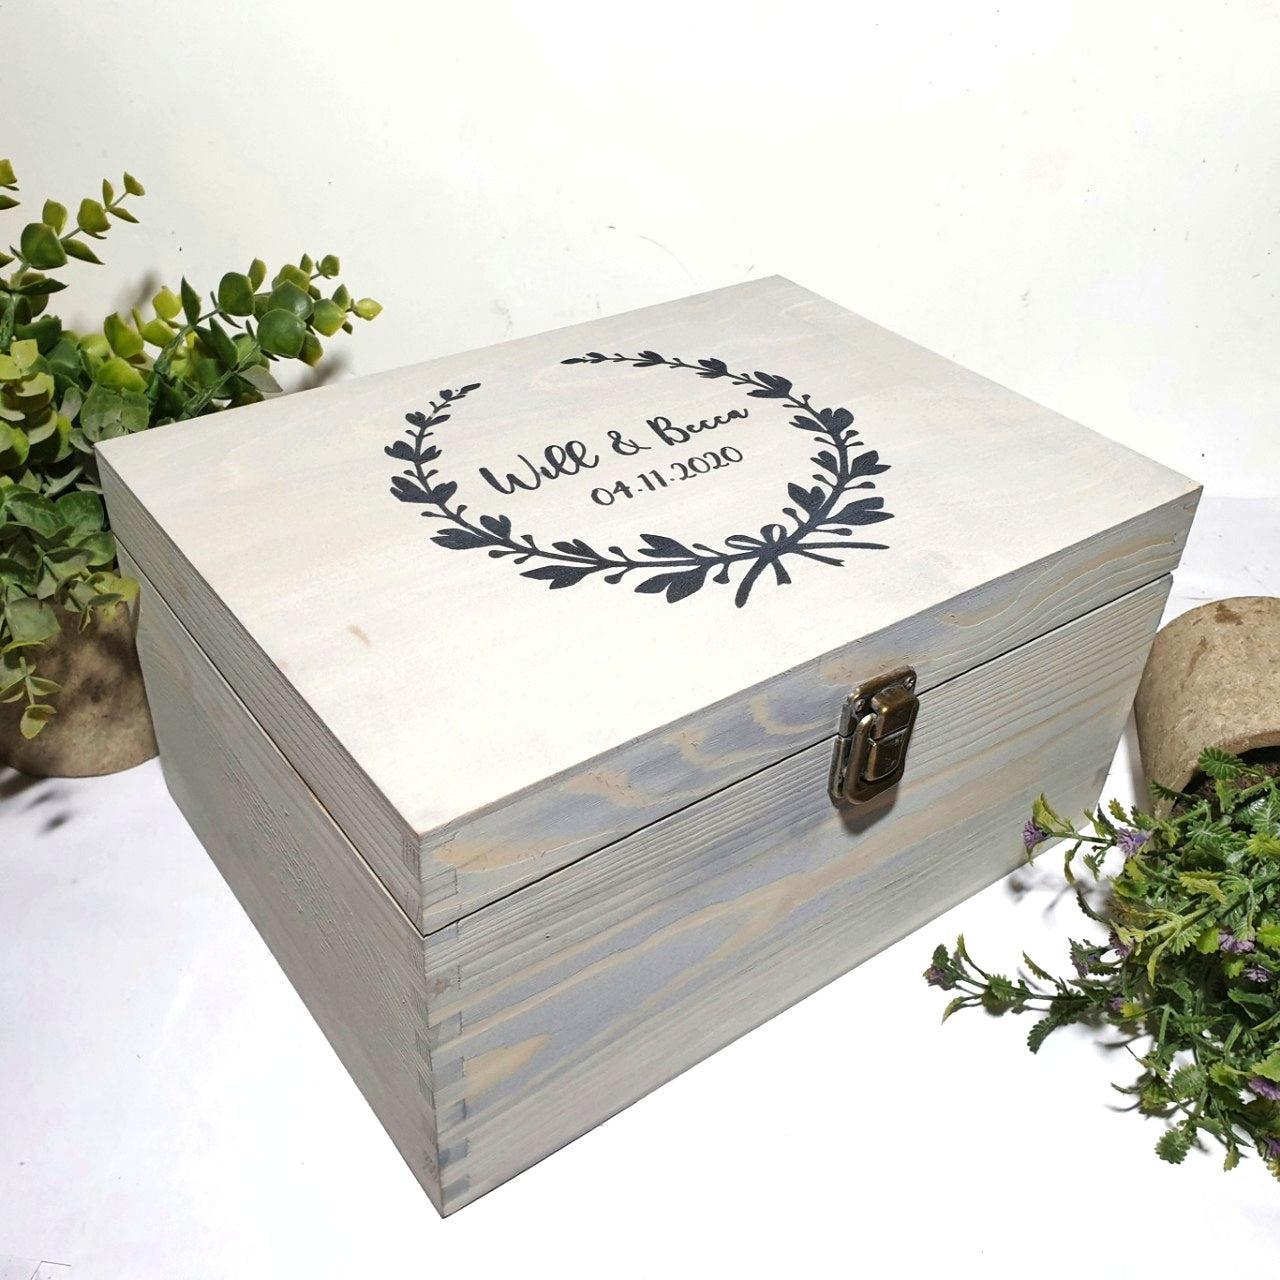 Personalised Couples Gift I His and Hers Engraved Wooden Keepsake Box